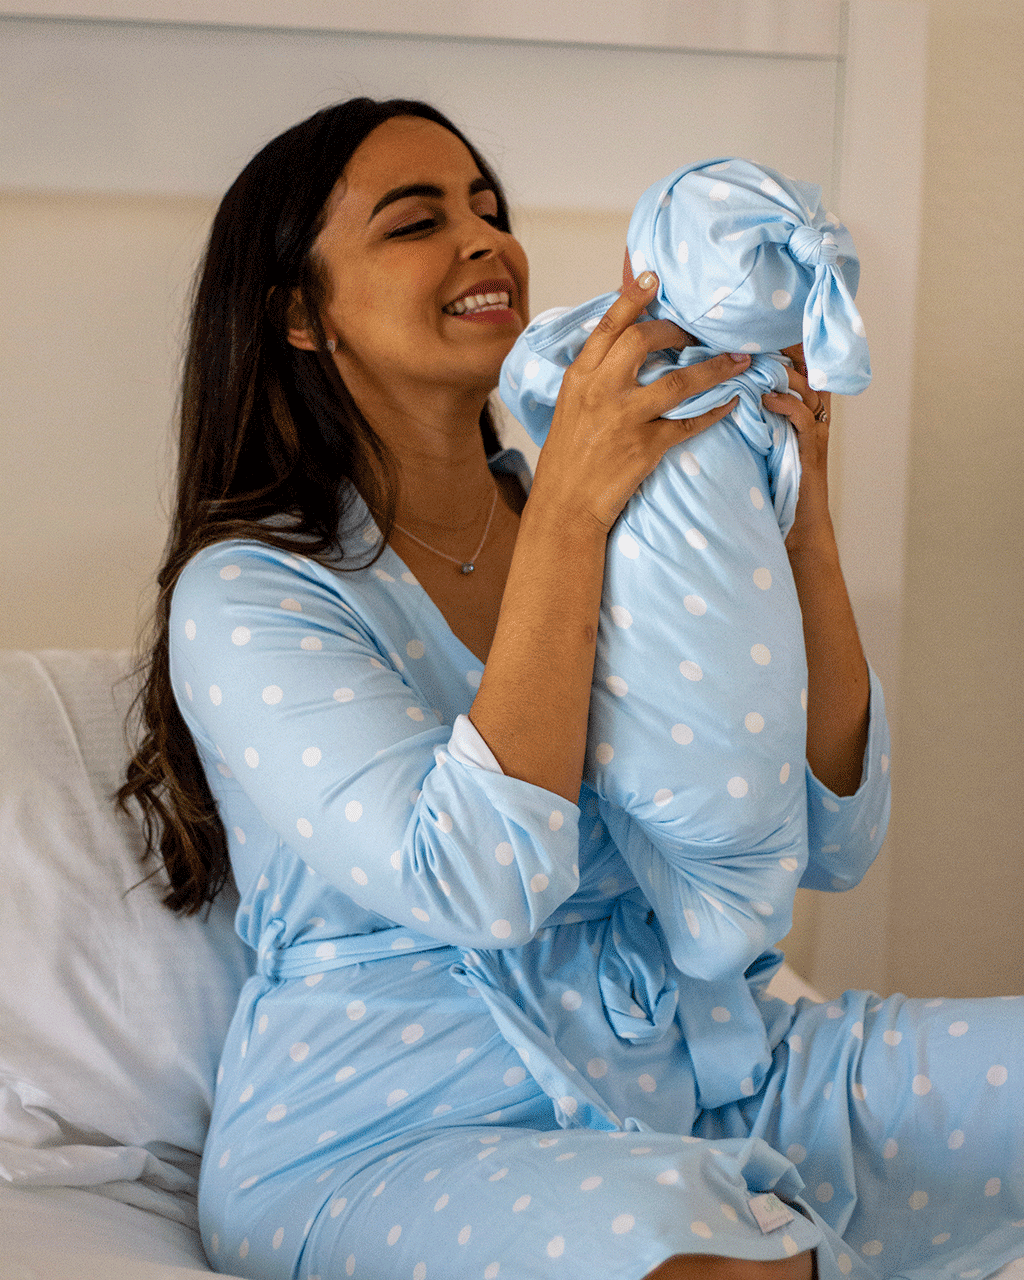  Mommy ‘o’ Clock Mommy Robe And Baby Swaddle Blanket